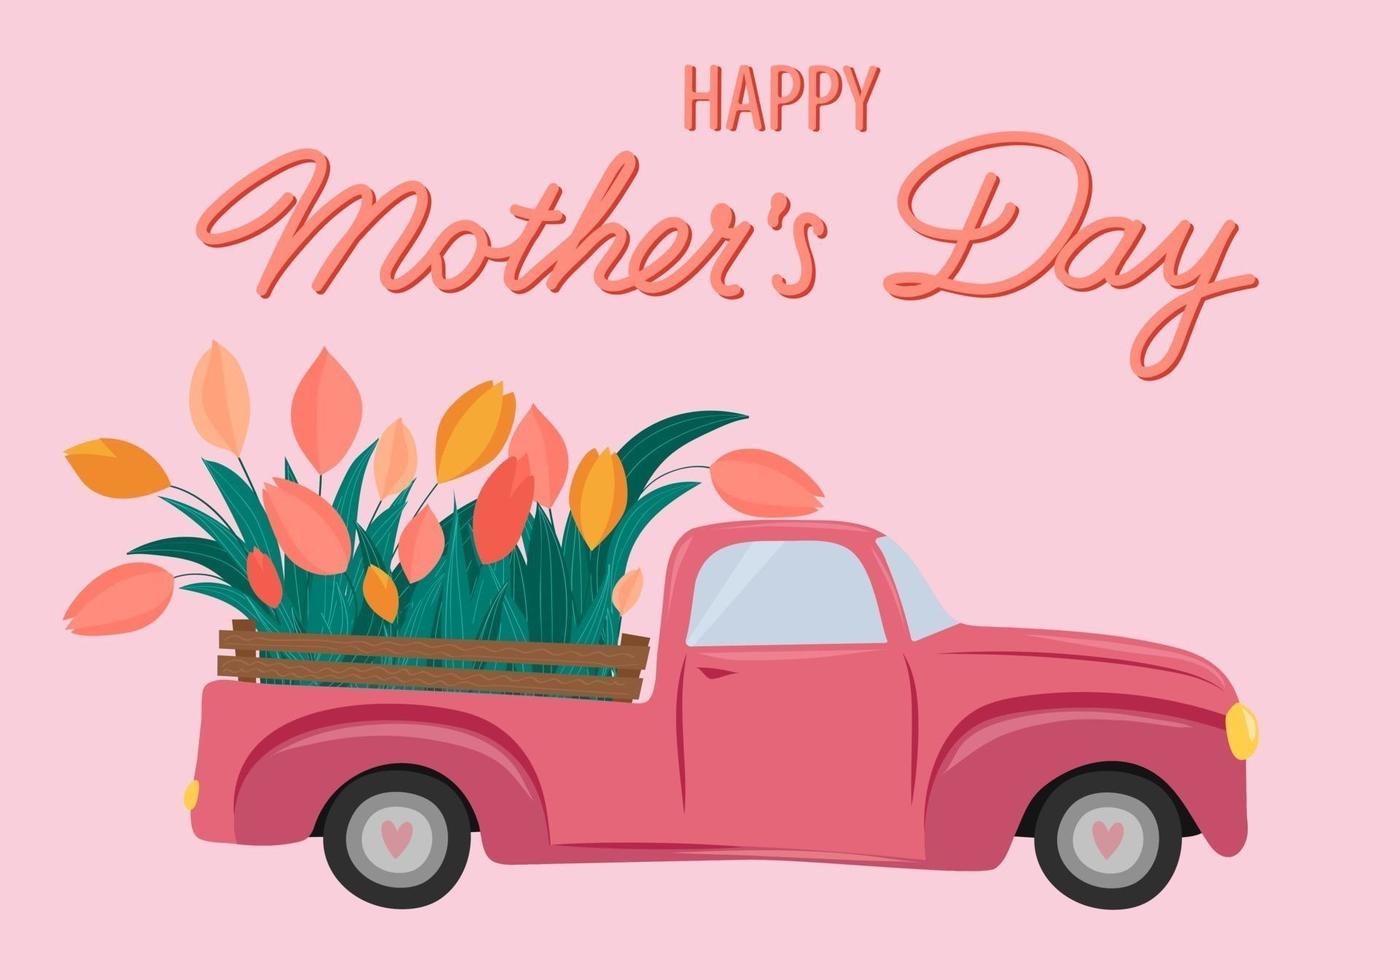 Happy Mother's Day greeting card. Pink Car with tulips in the back. vector